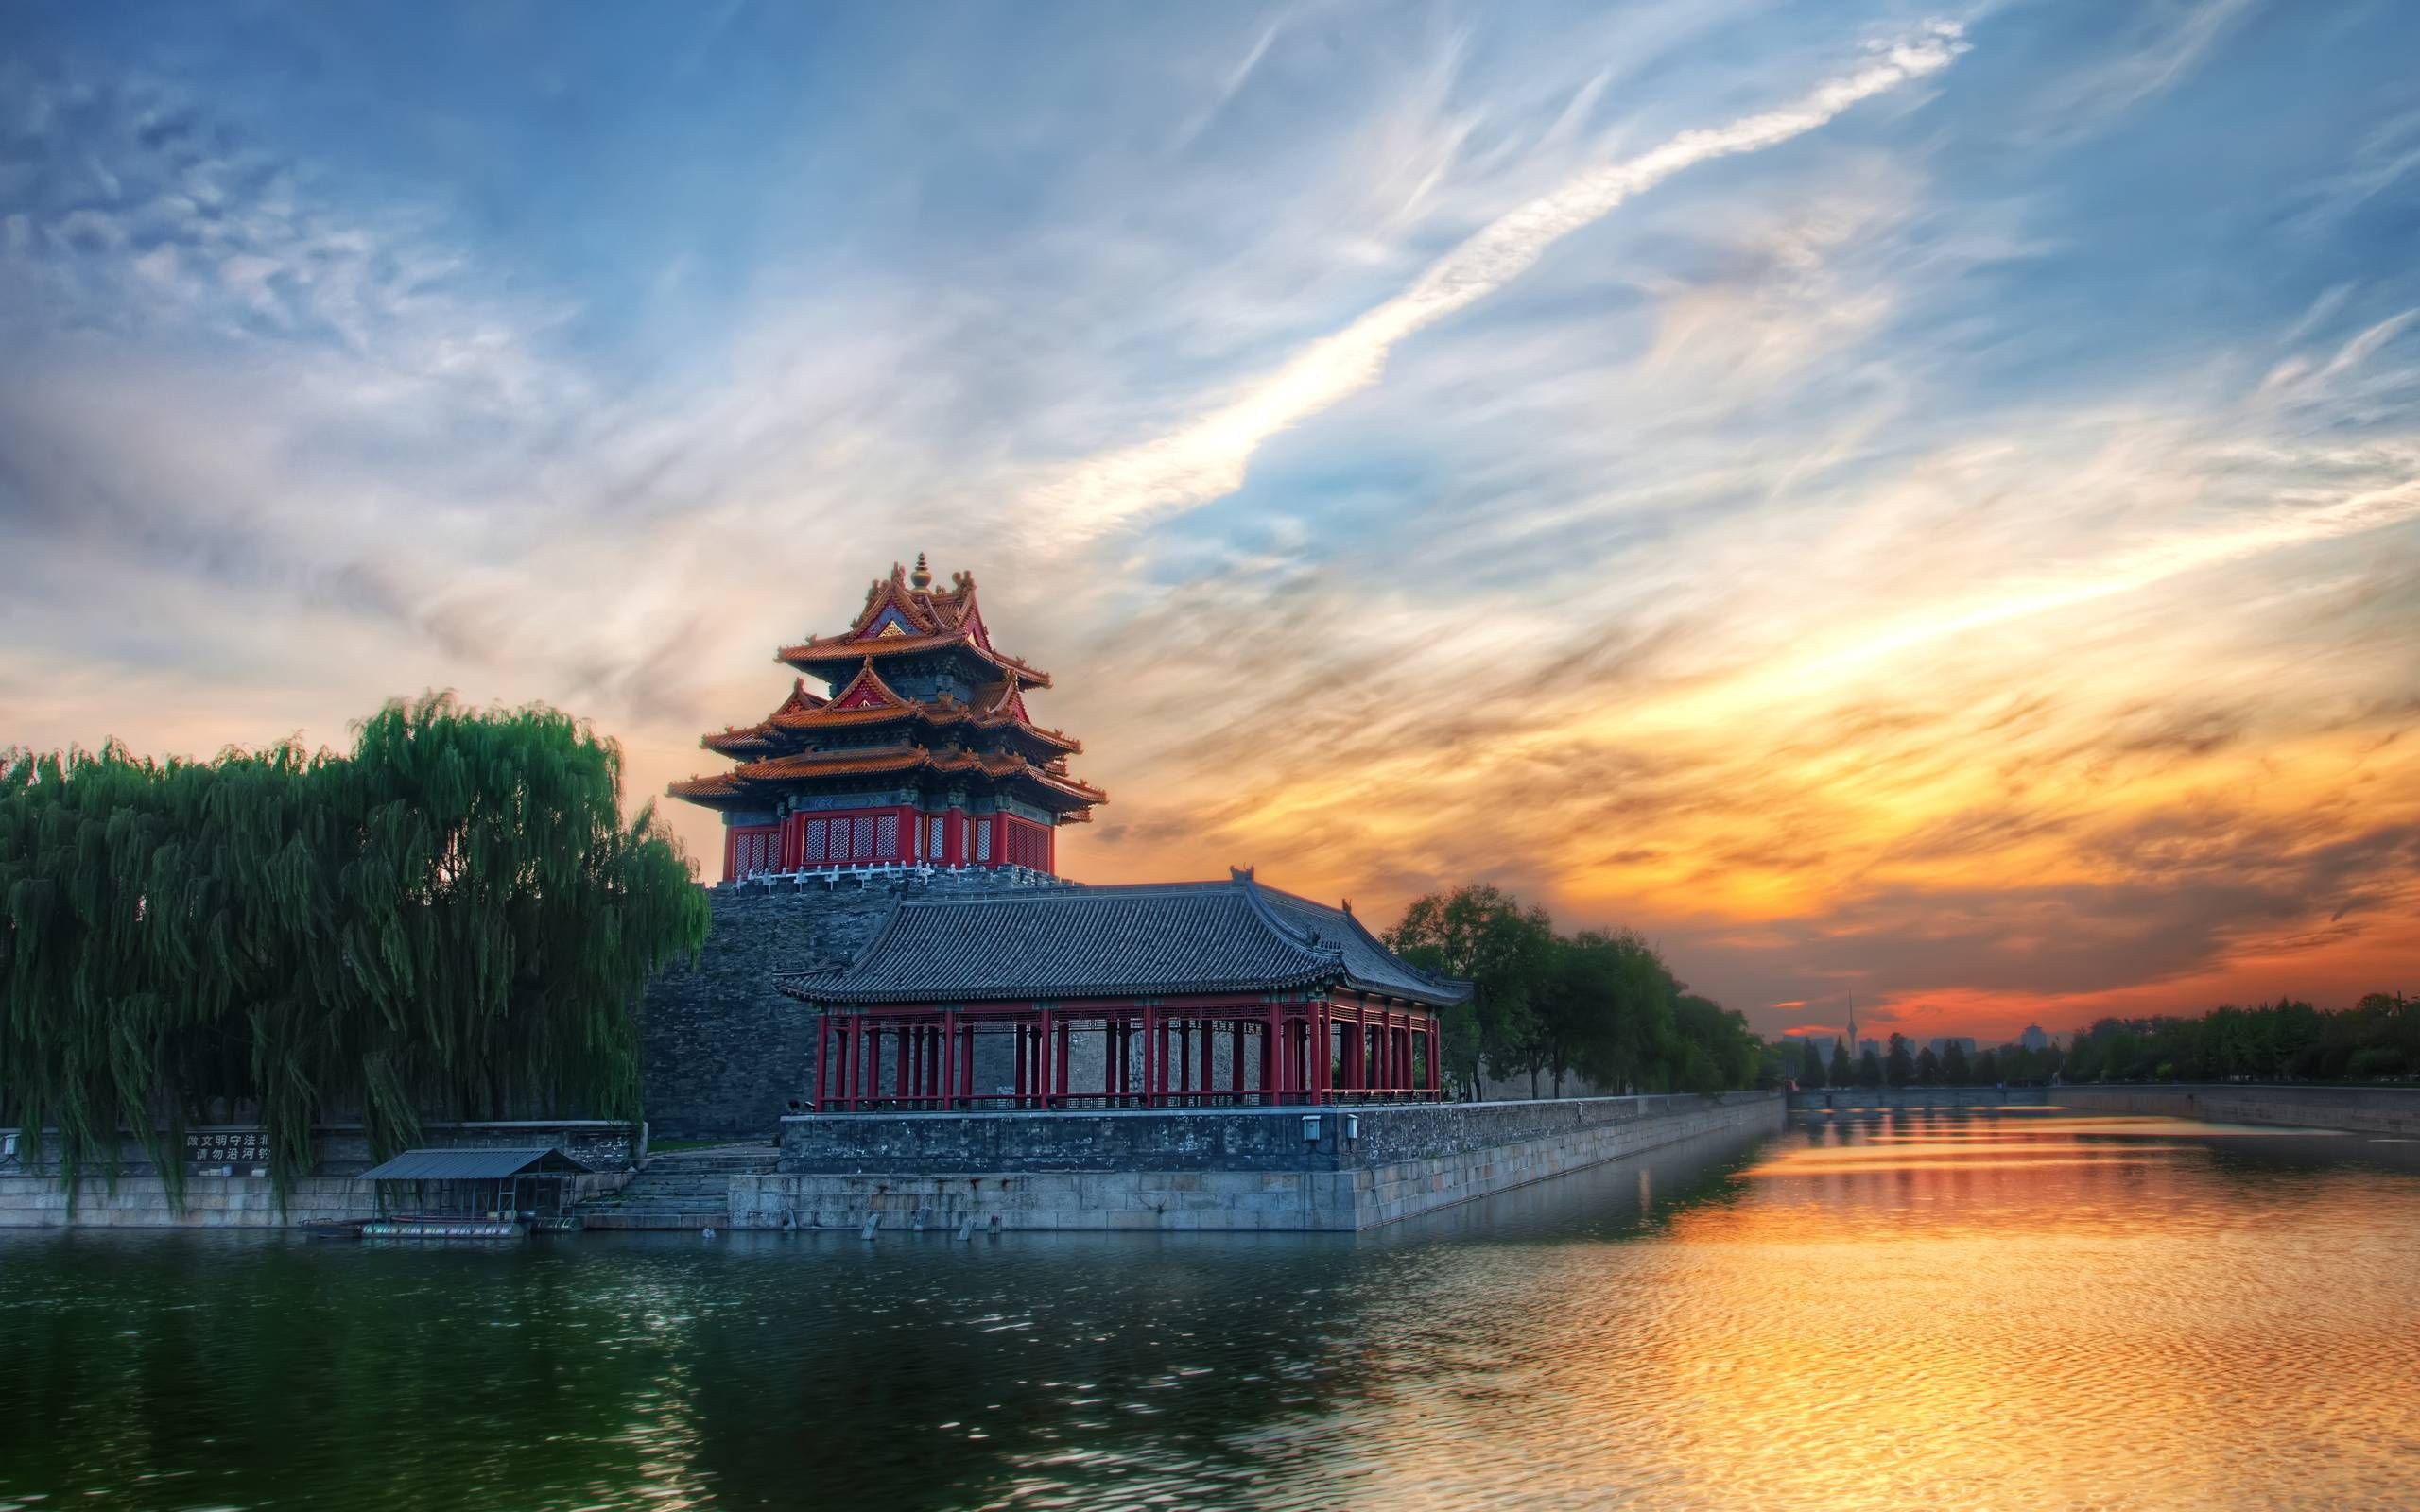 Asia Wallpaper, Asia Wallpaper For Free Download, Desktop Screens. China City, Forbidden City, World Heritage Sites